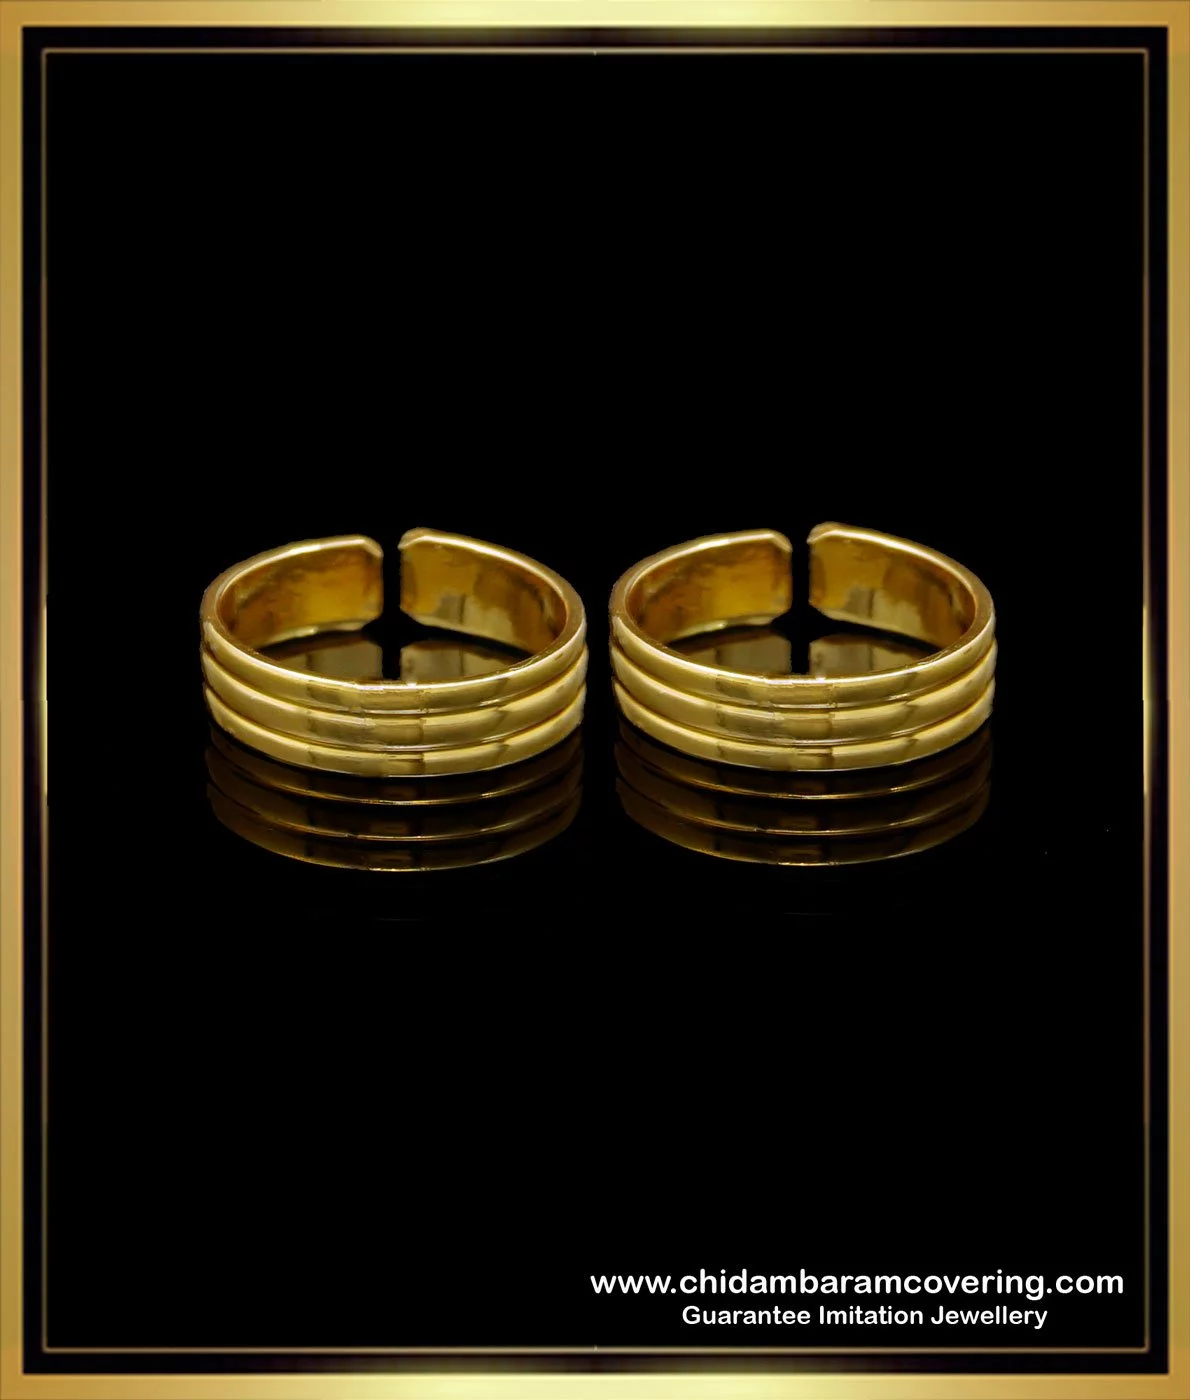 Adjustable toe ring gold plated Buy Stackable ToeRings Online India - 1 pair